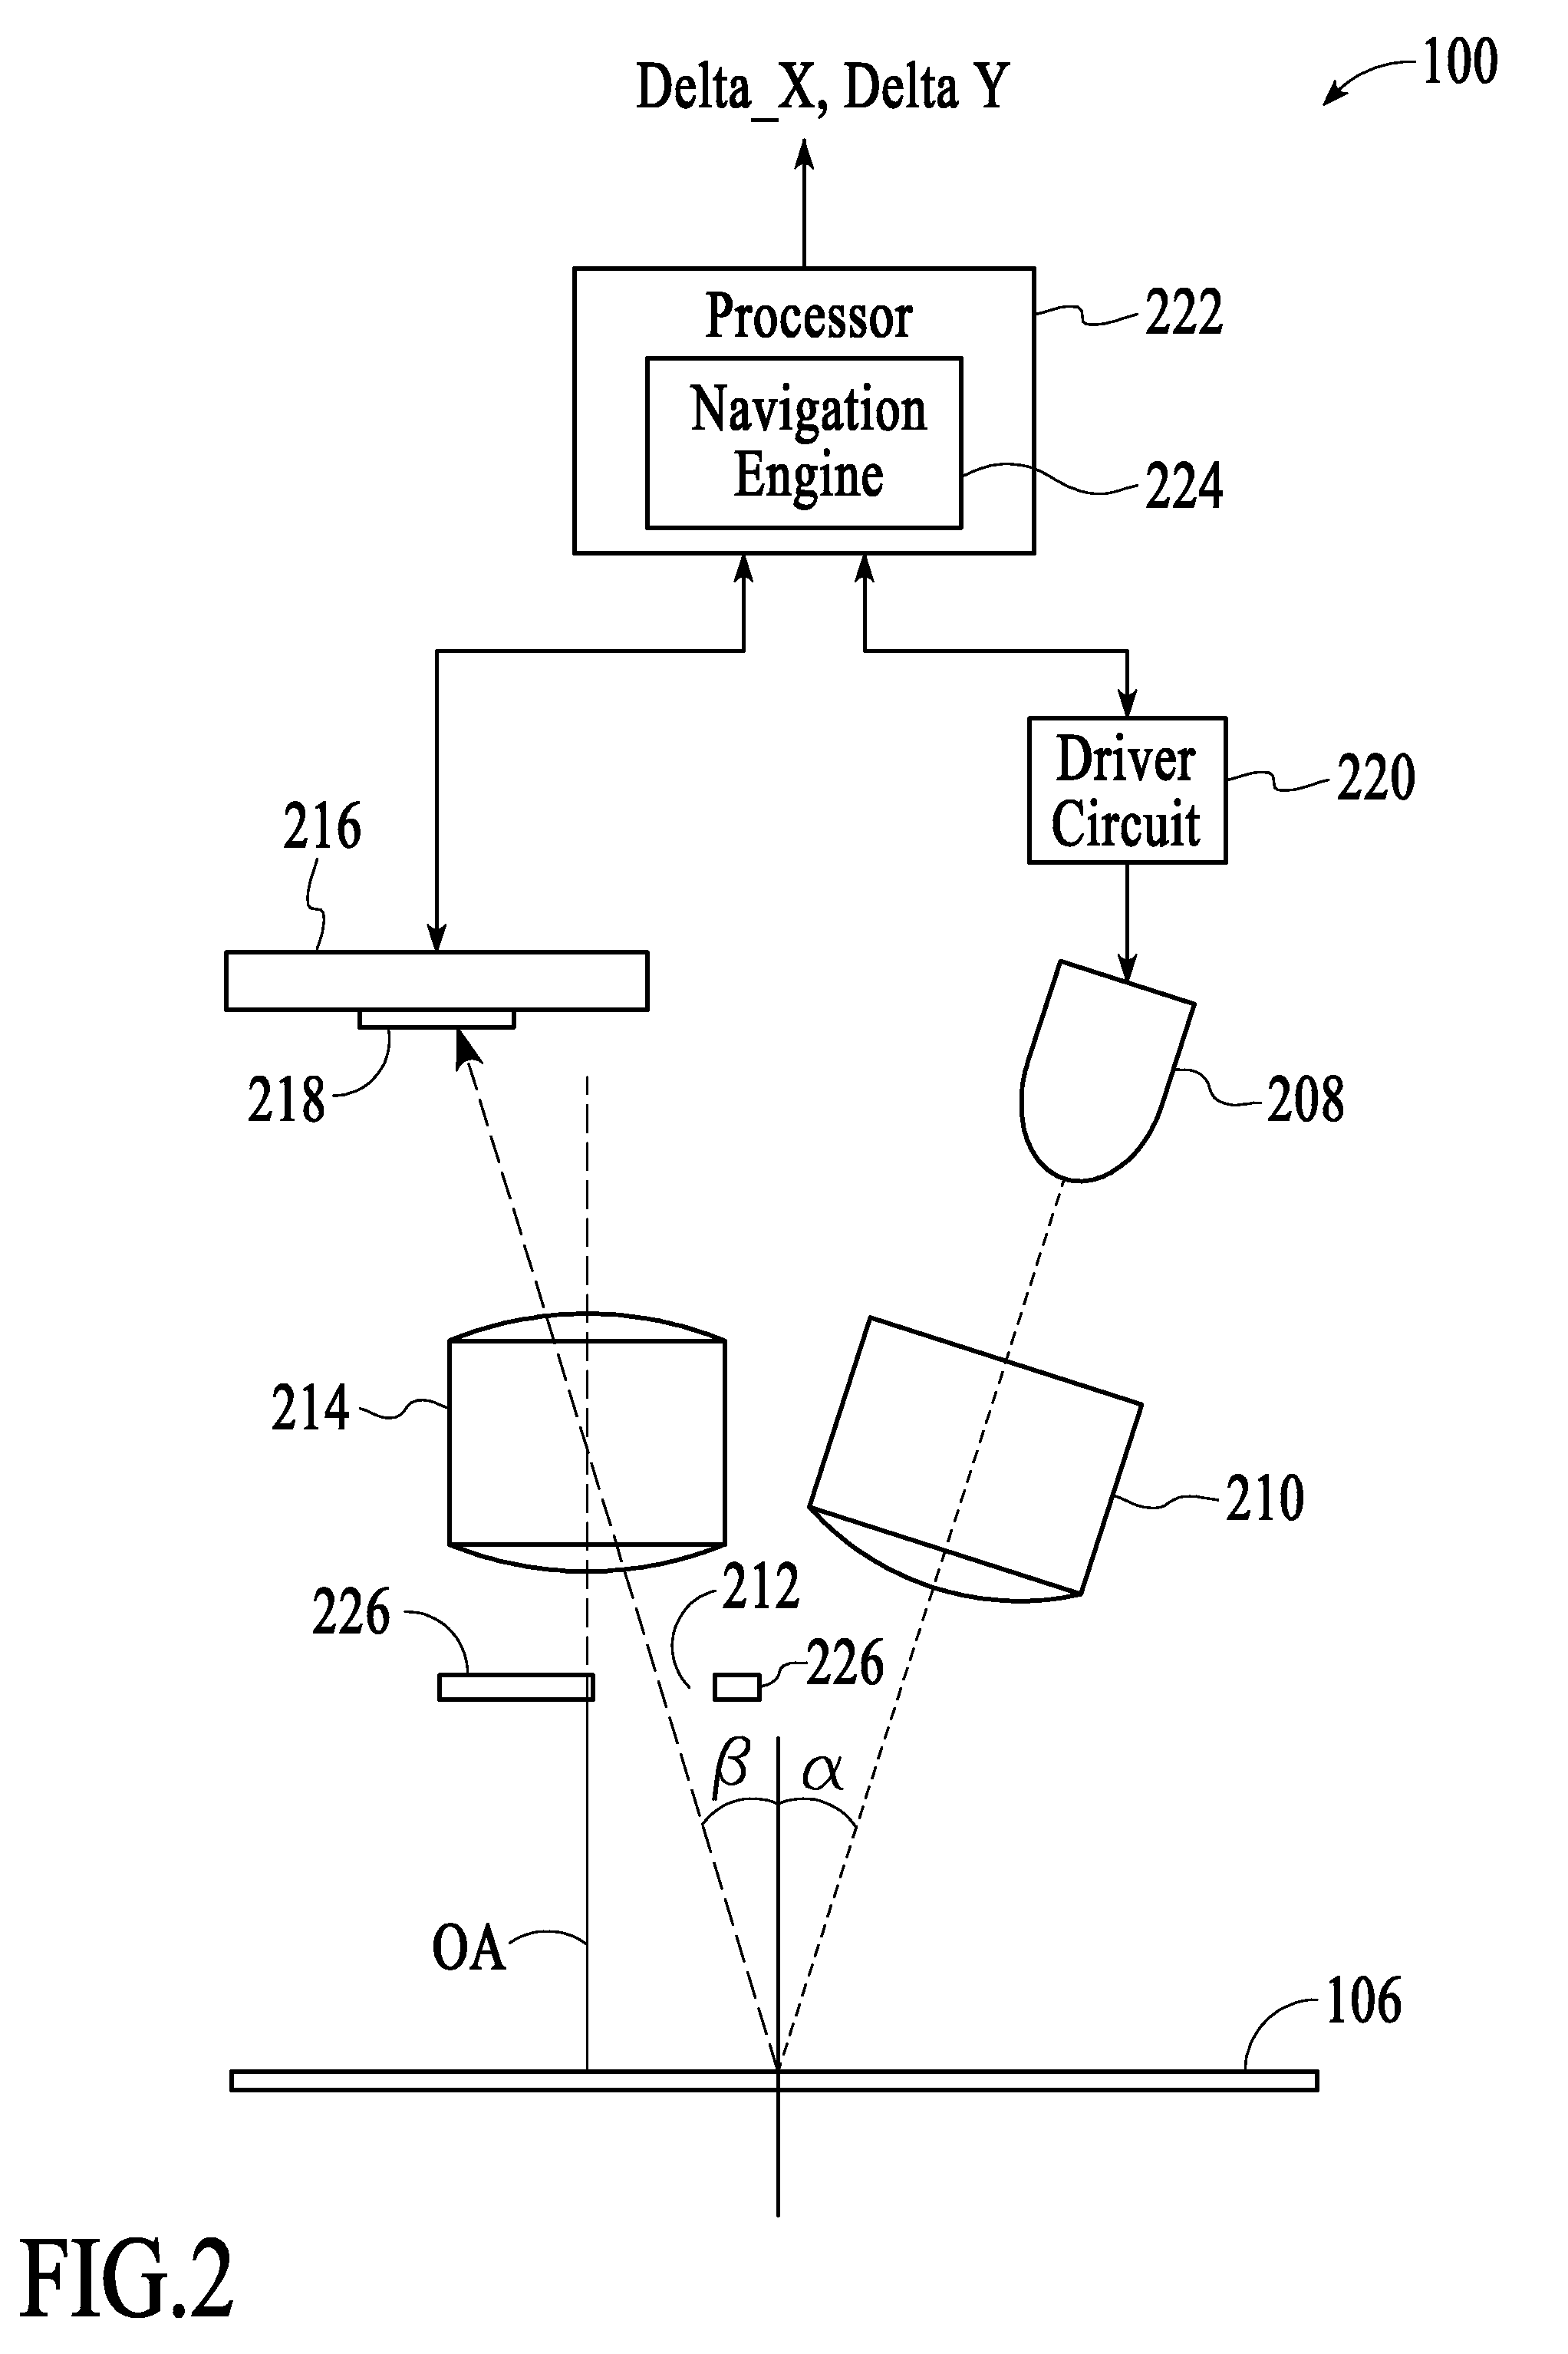 System and method for performing optical navigation using horizontally oriented imaging lens